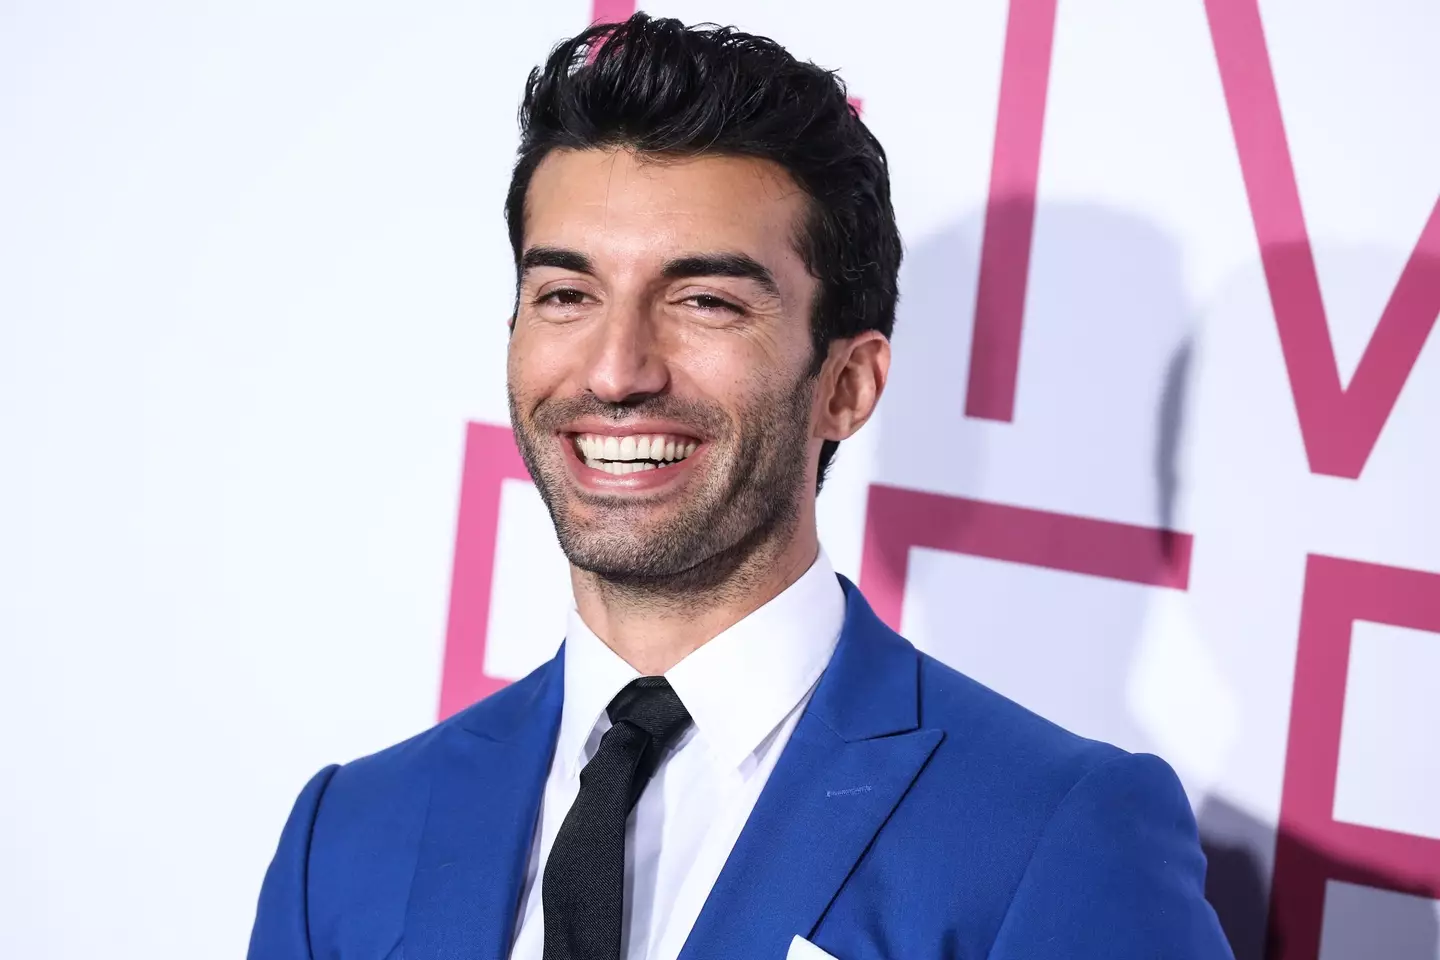 Jane the Virgin star Justin Baldoni will star and direct the adaptation of the book.